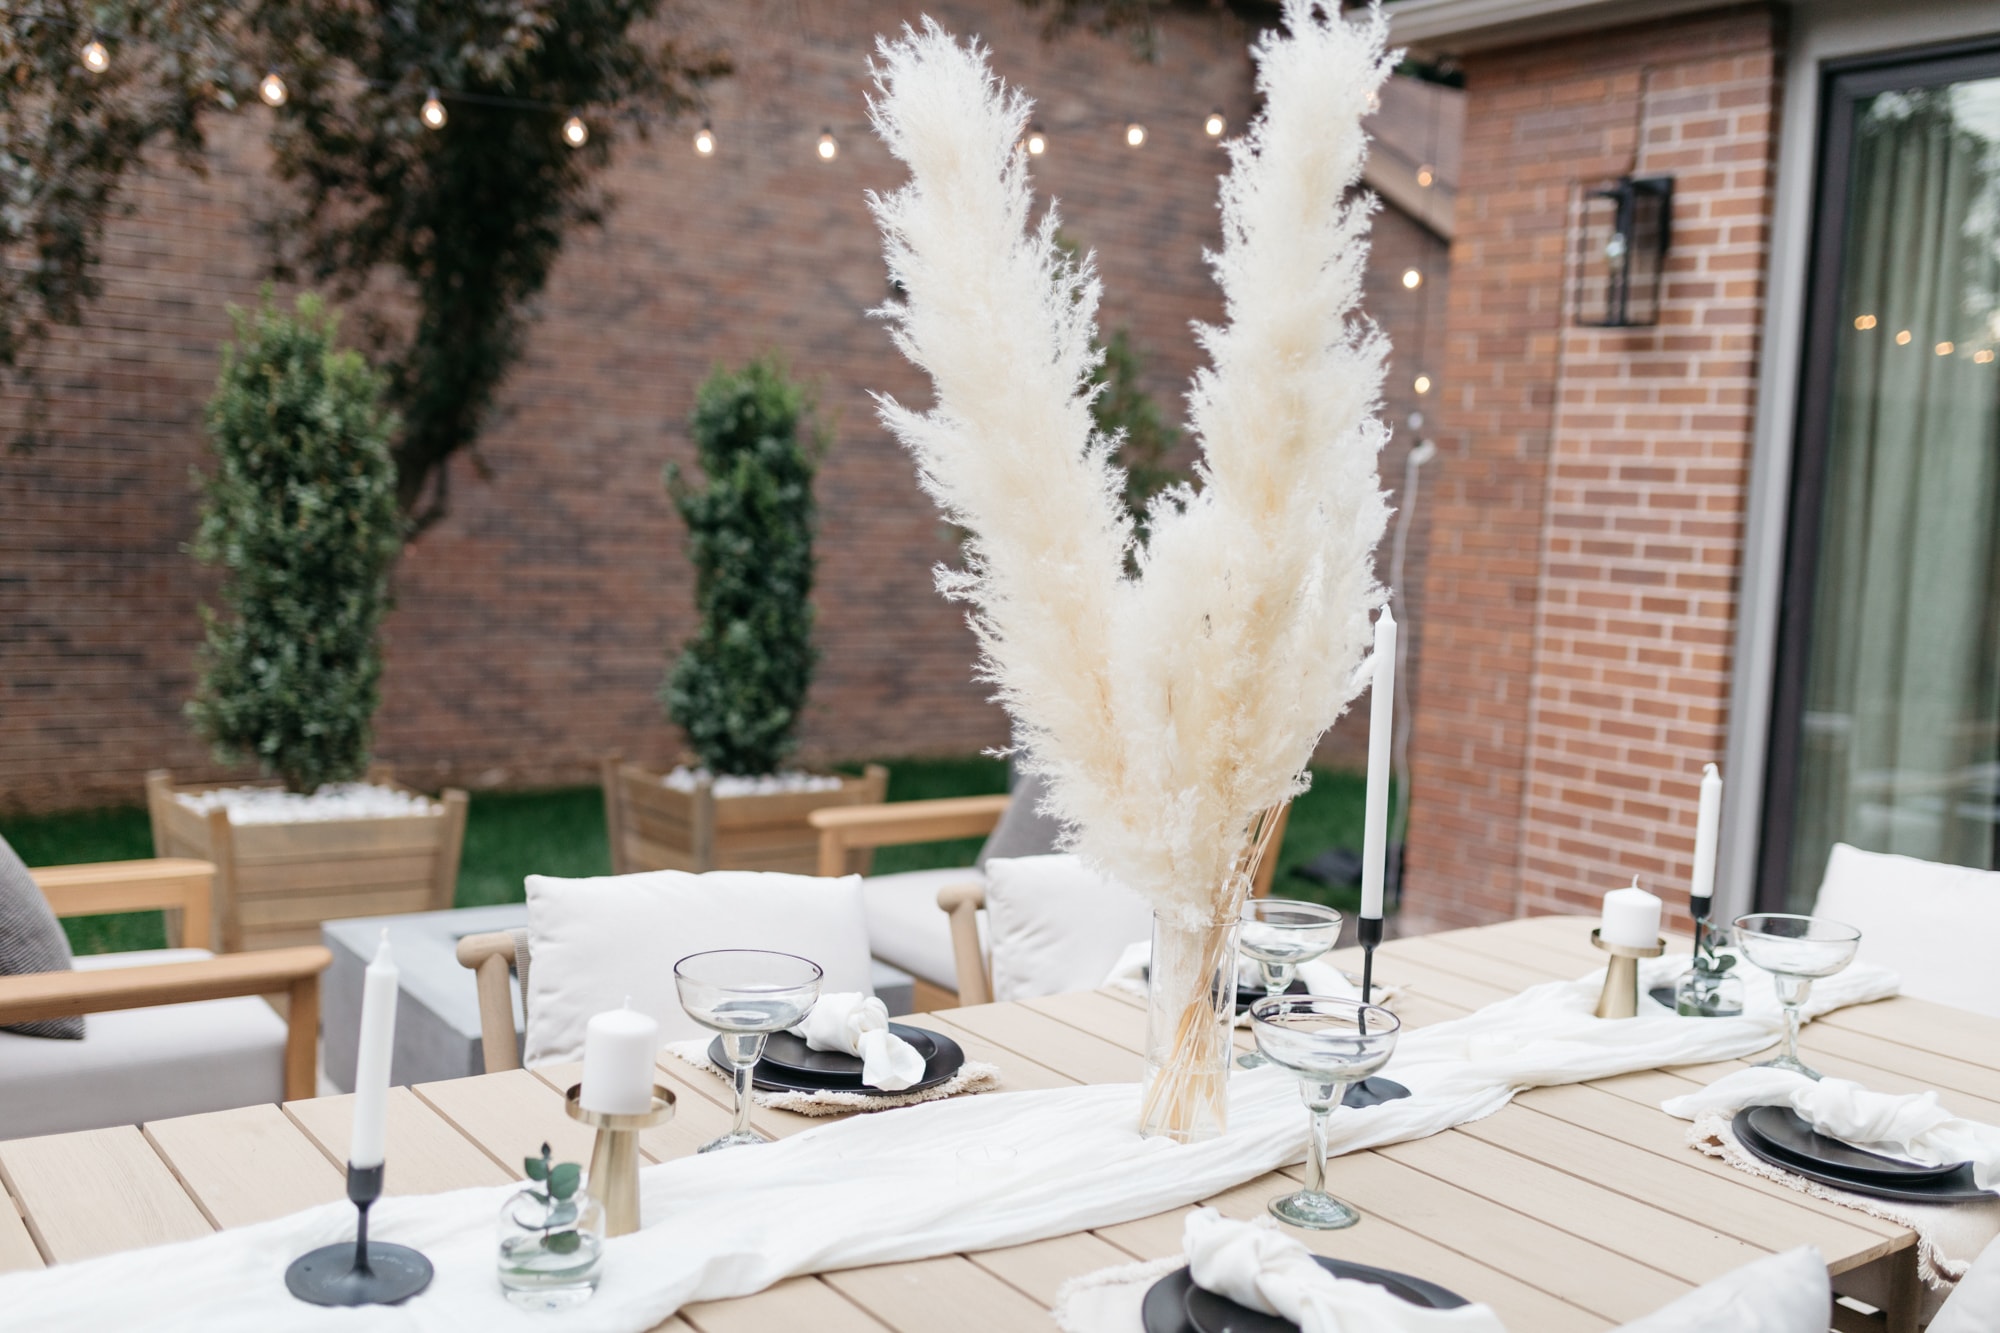 brighton butler outdoor table set up pampas grass Mexican dinner, pampas tables cape, boho table